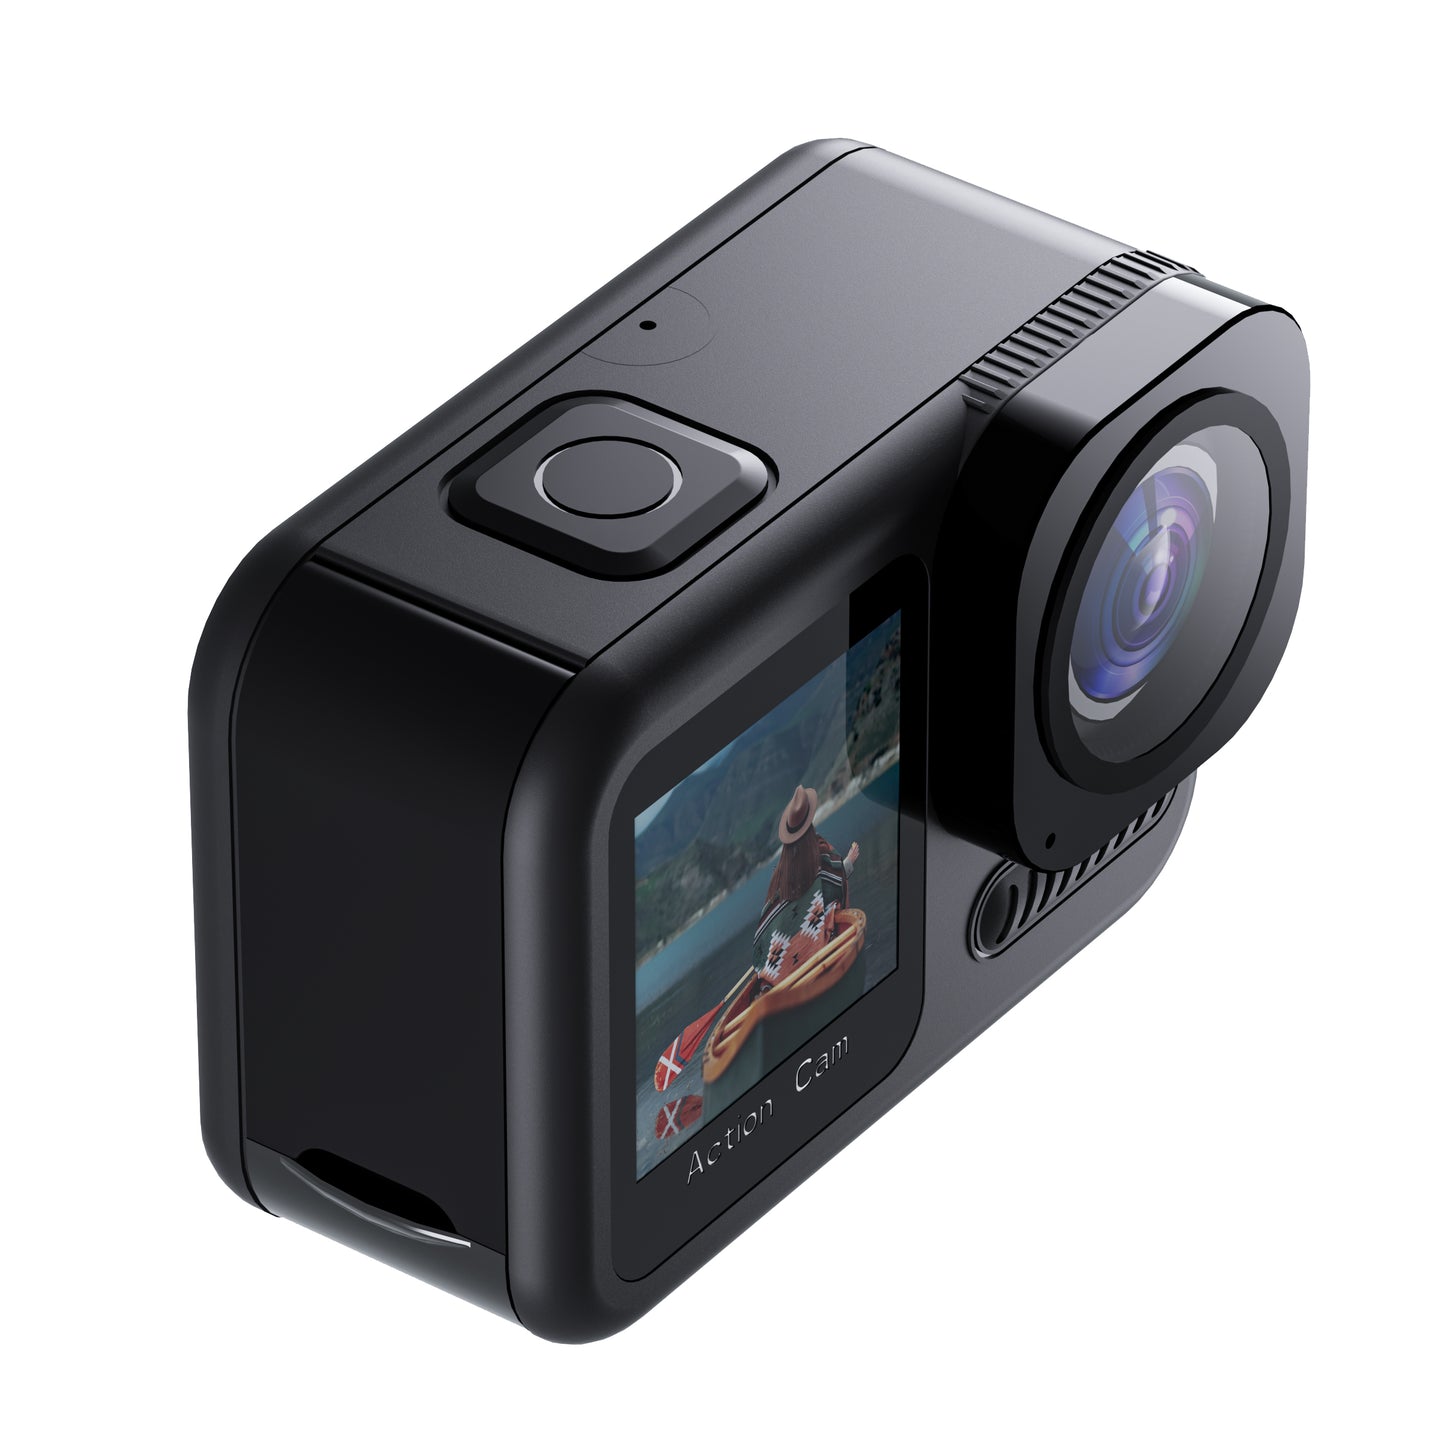 The Bigly Brothers Tribeca 2n2 Action Camera: 20M Body Waterproof, WiFi, 4K 60fps, 6-Axis EIS Anti-Shake, Dual Touch Screen, Wireless Remote Controller with a built-in Microphone